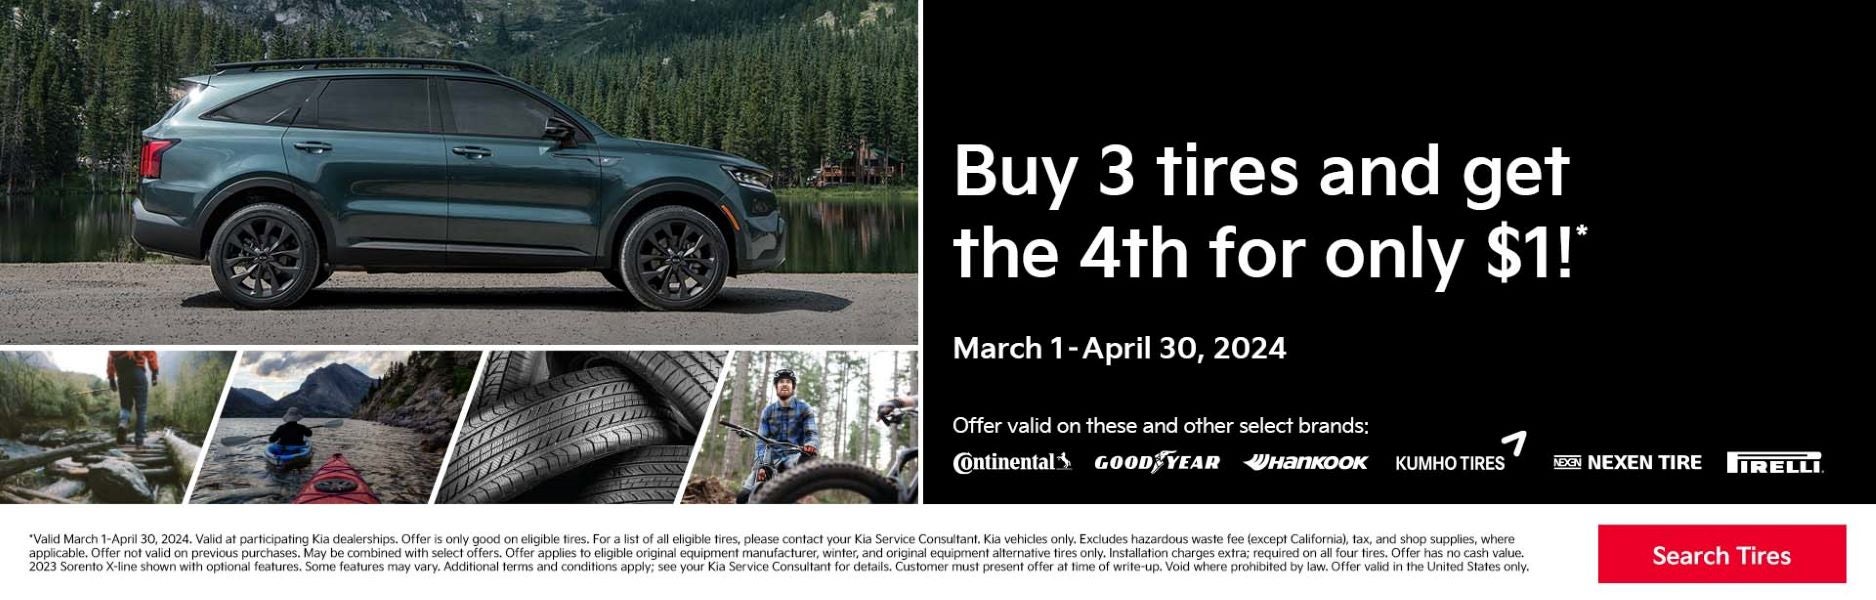 Buy 3 tires and get the 4th $1